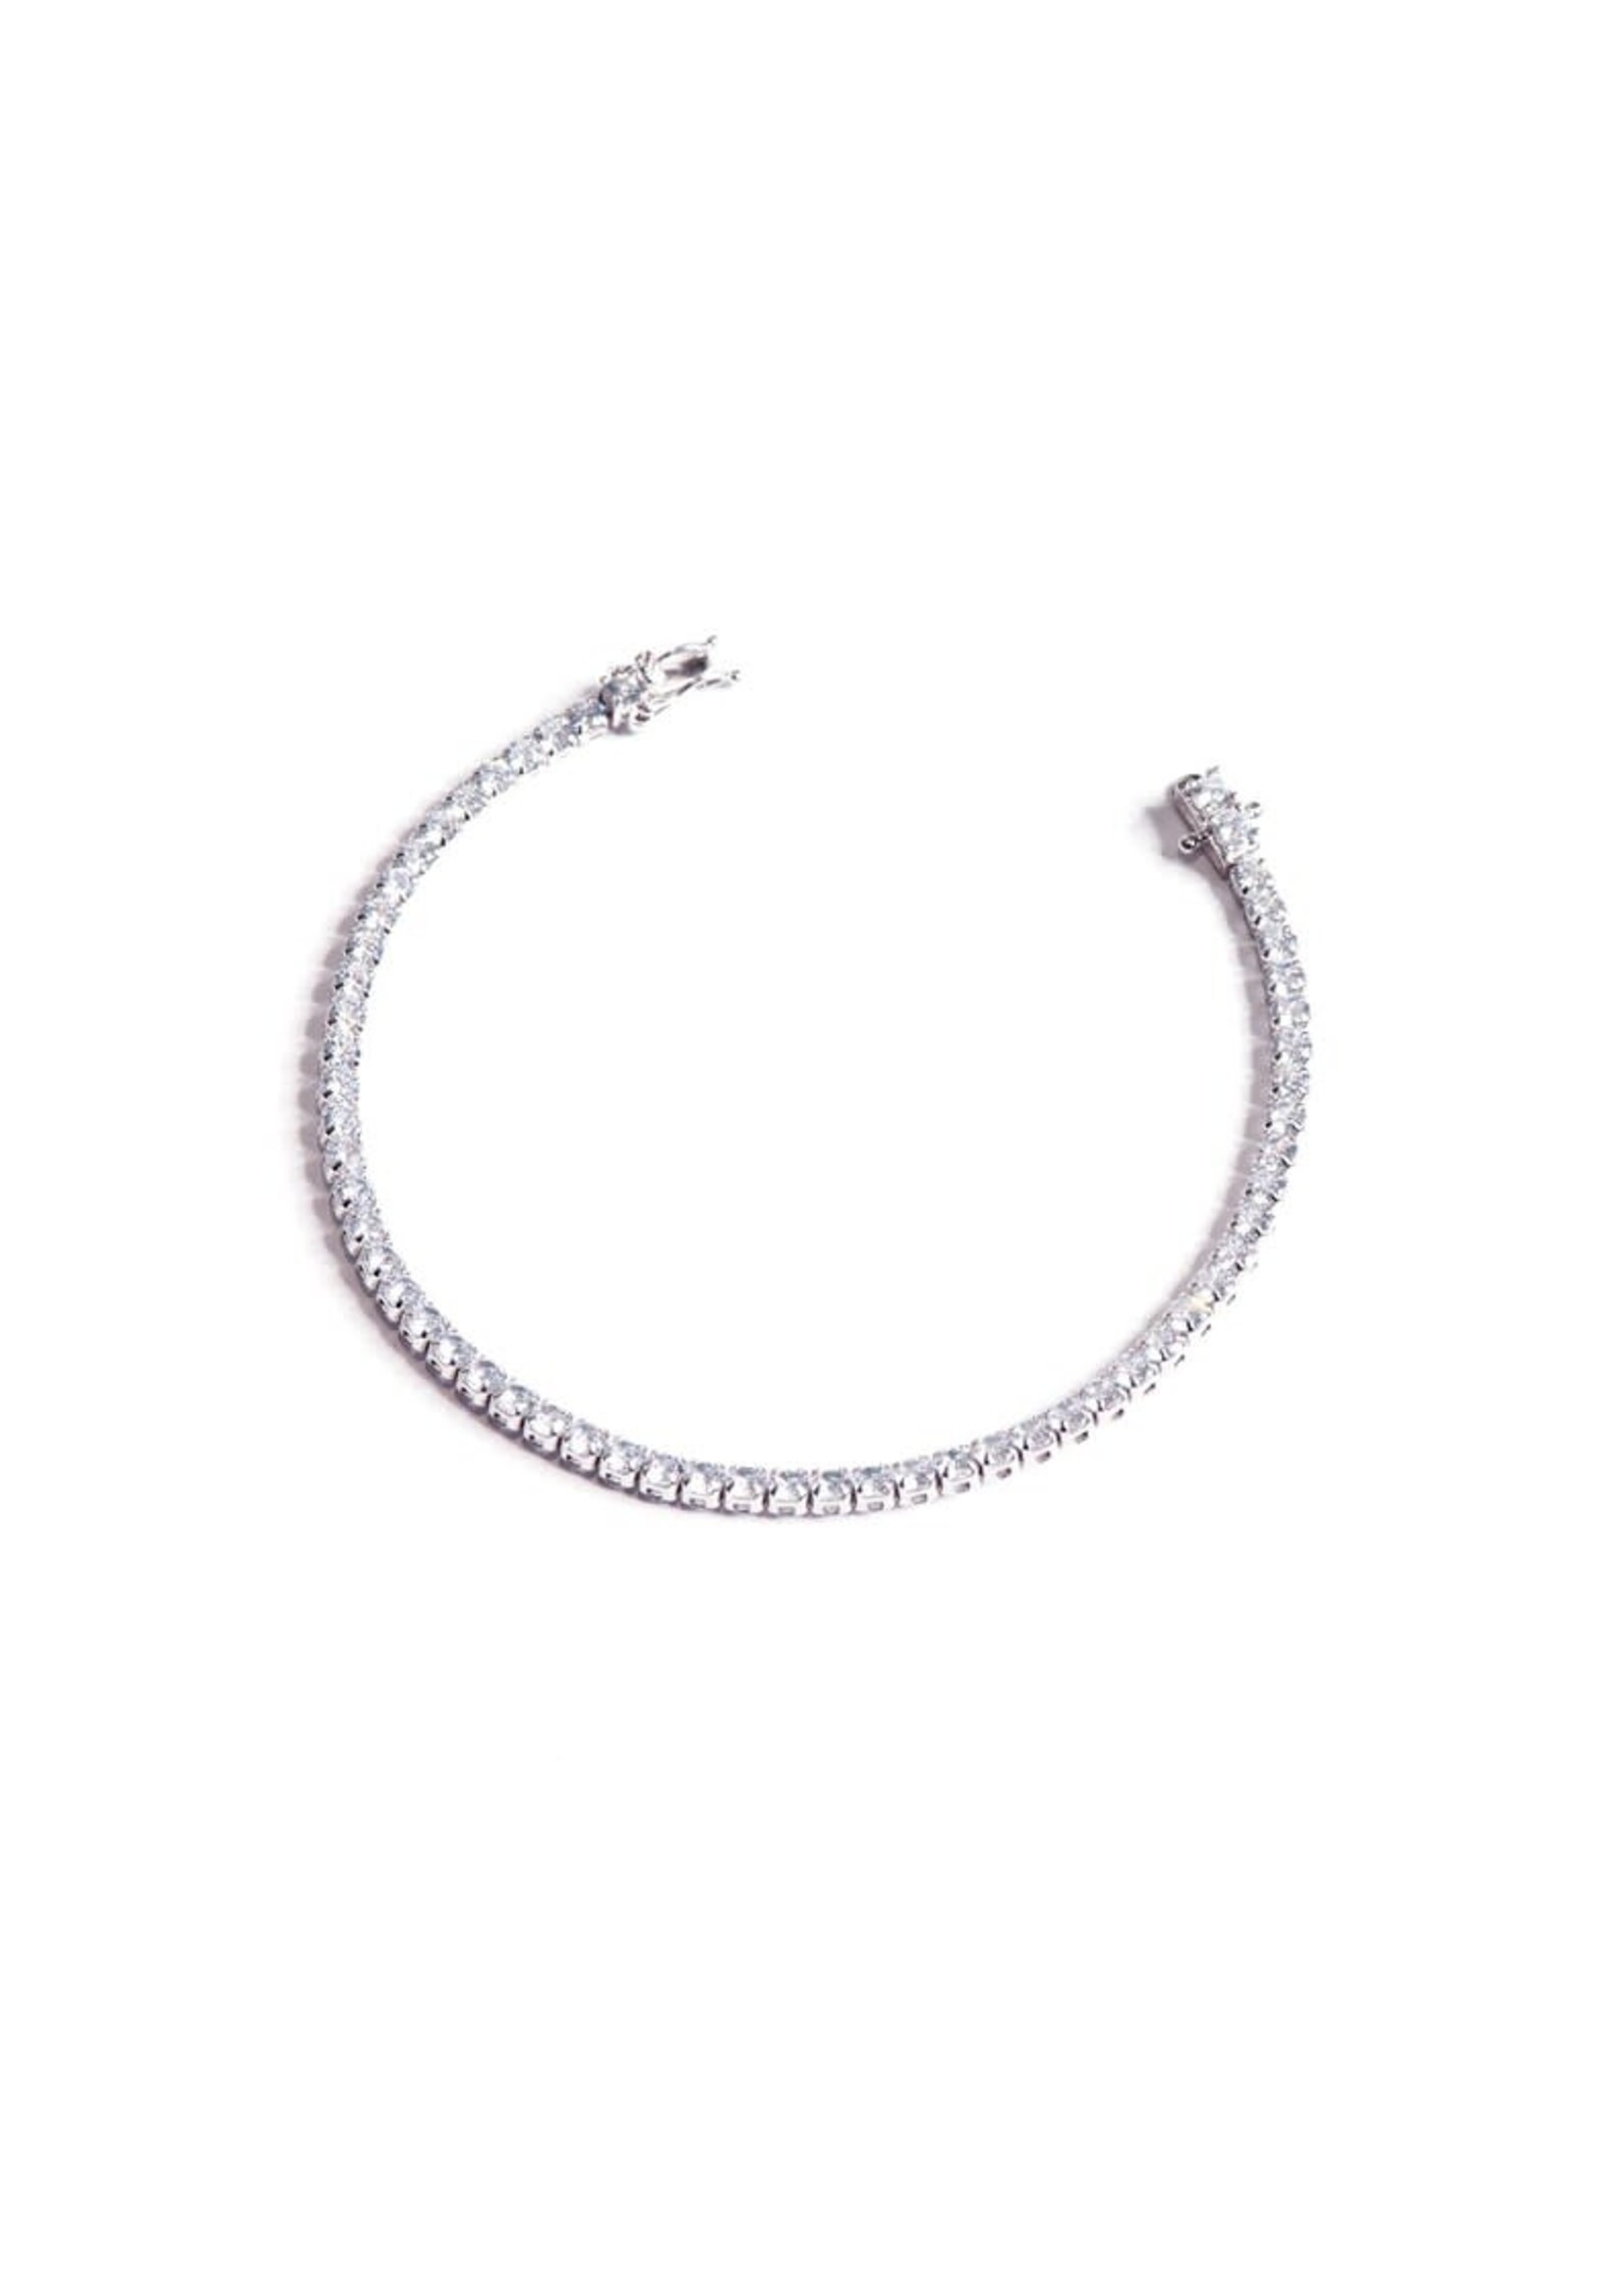 Silver and CZ Tennis Bracelet 2mm Rhodium Plated